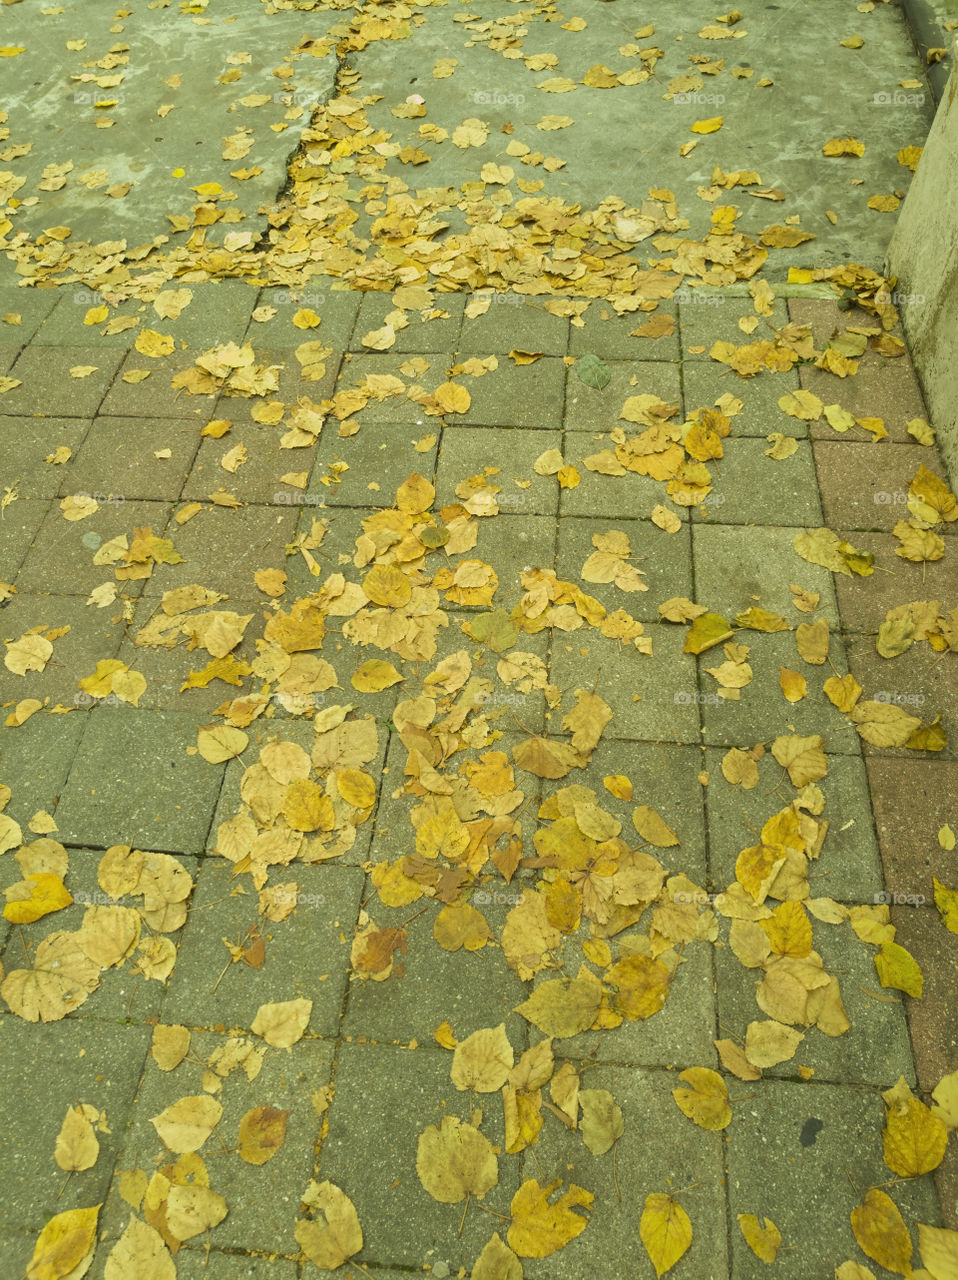 mn leaves on pavement